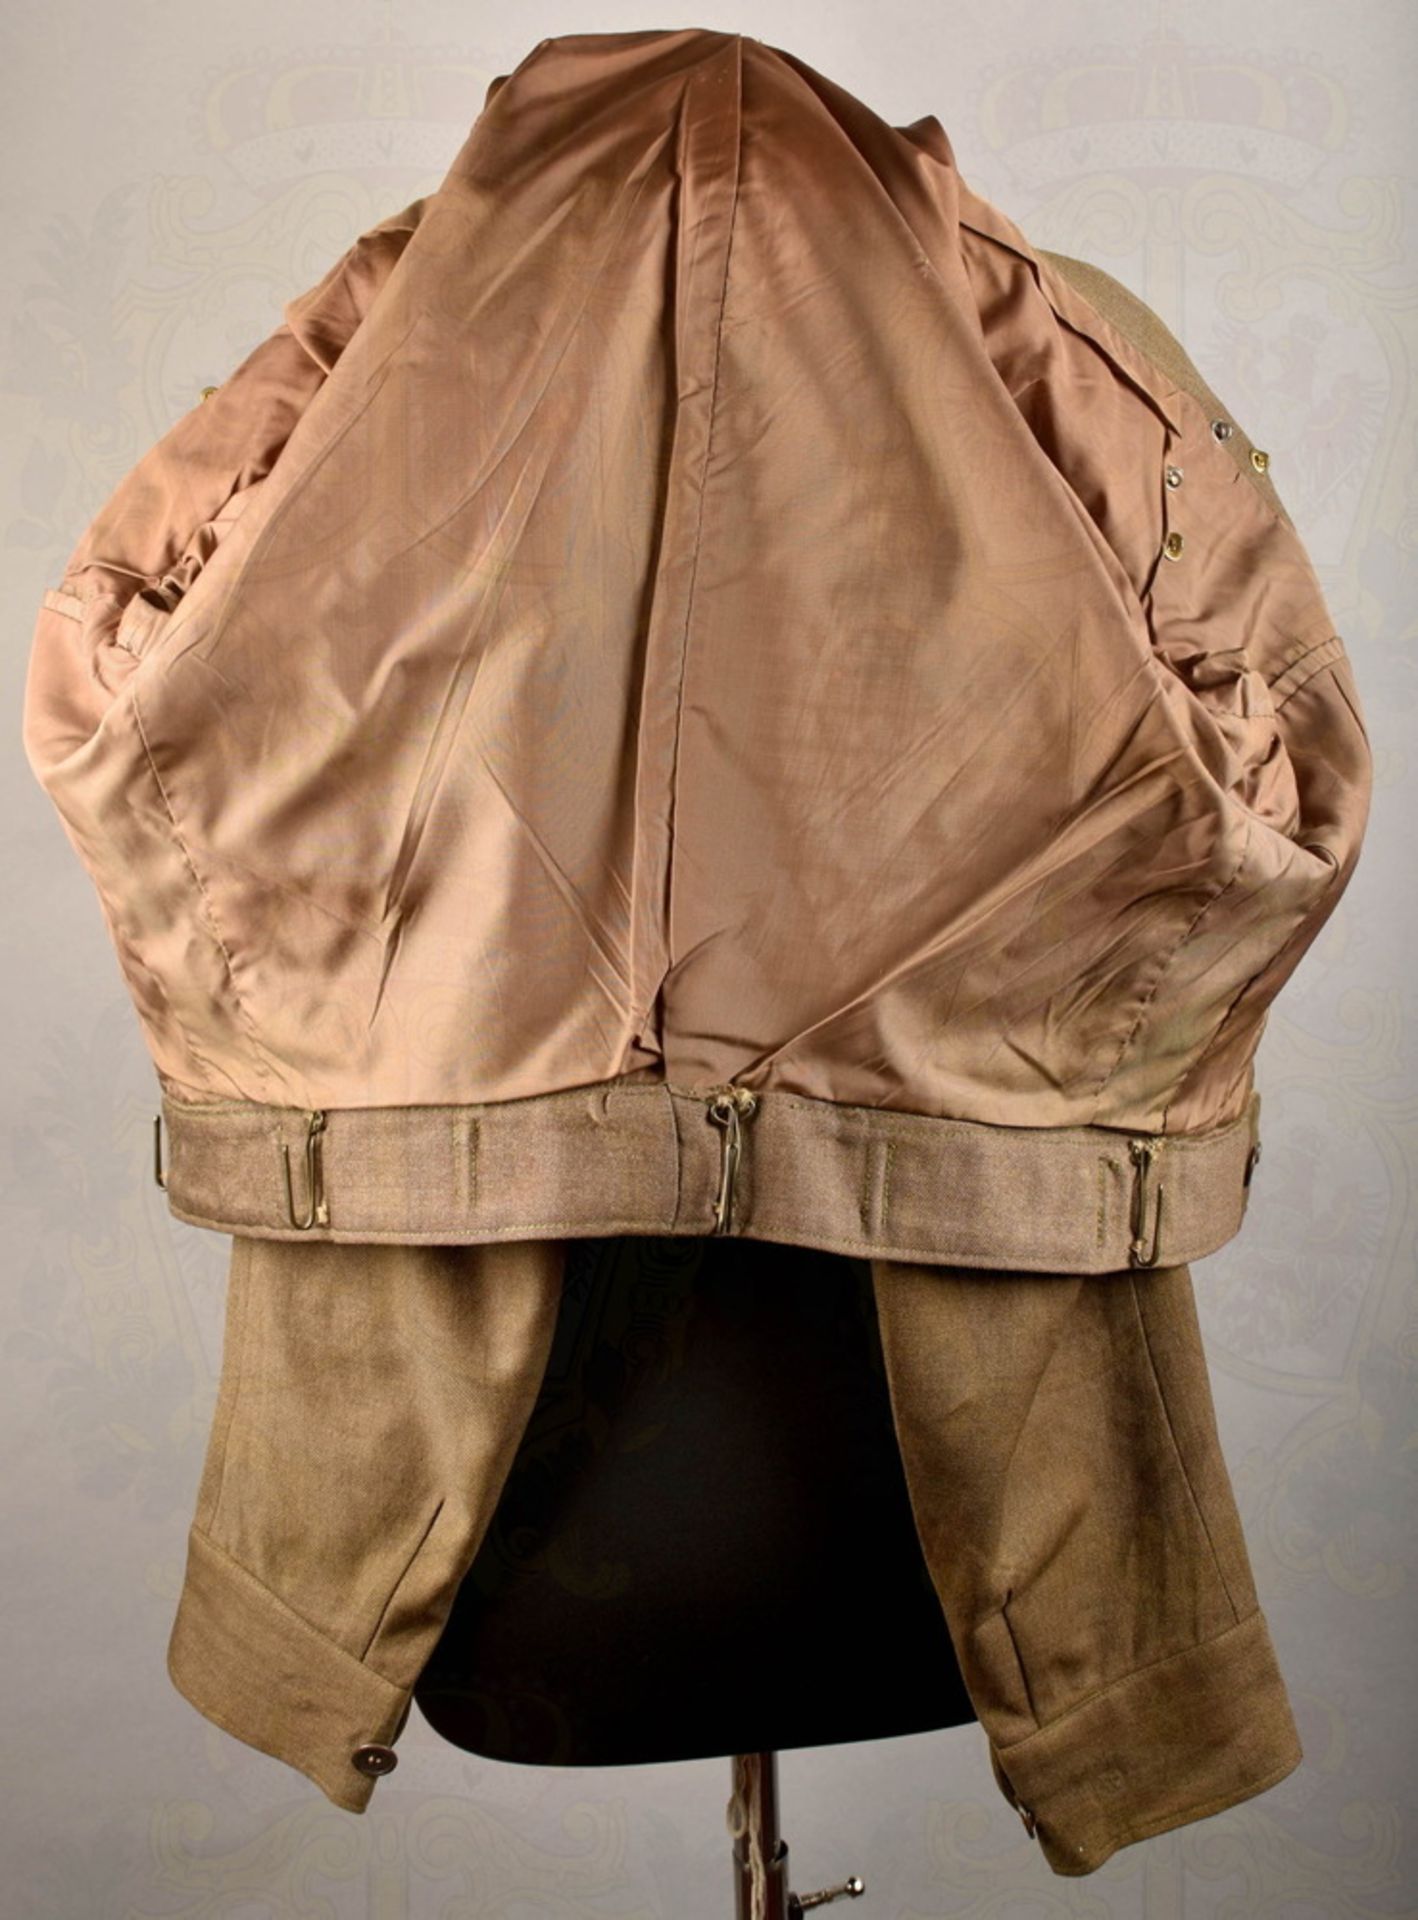 Uniform of the 101st Airborne Division - Image 6 of 6